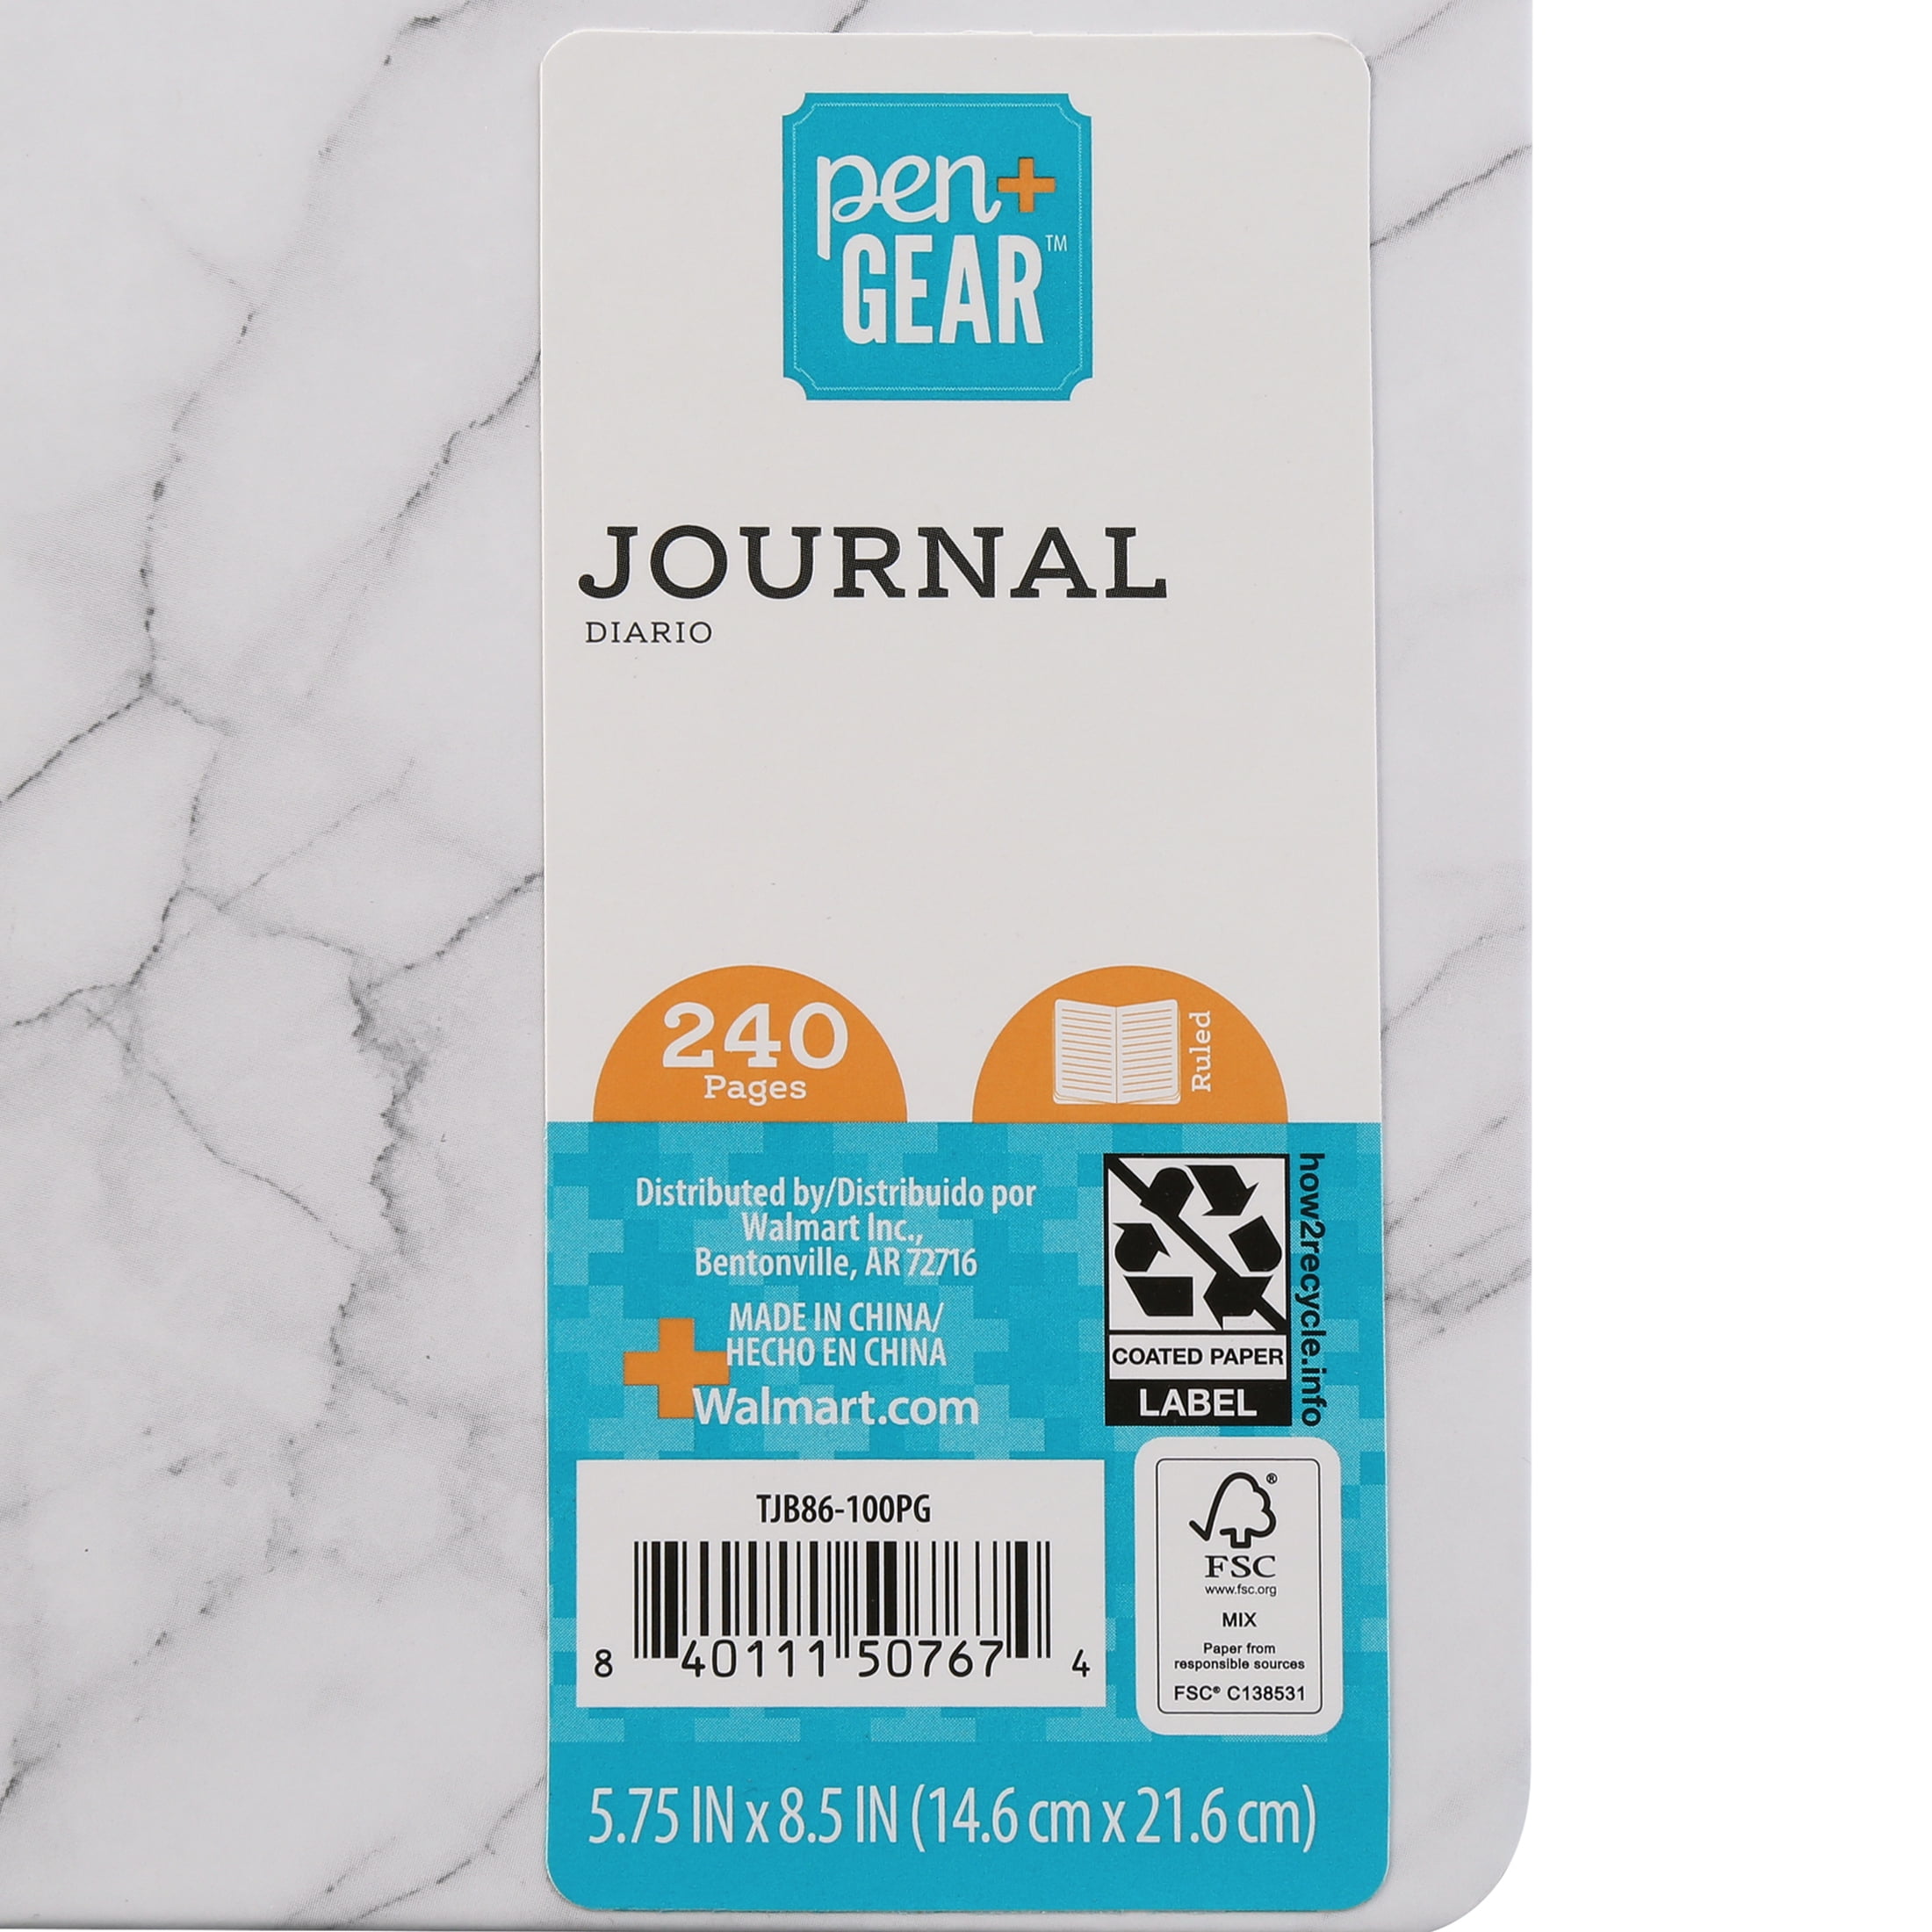 Pen+gear Journal, Geo-Holographic, 240 Ruled Pages, Spiral Bound